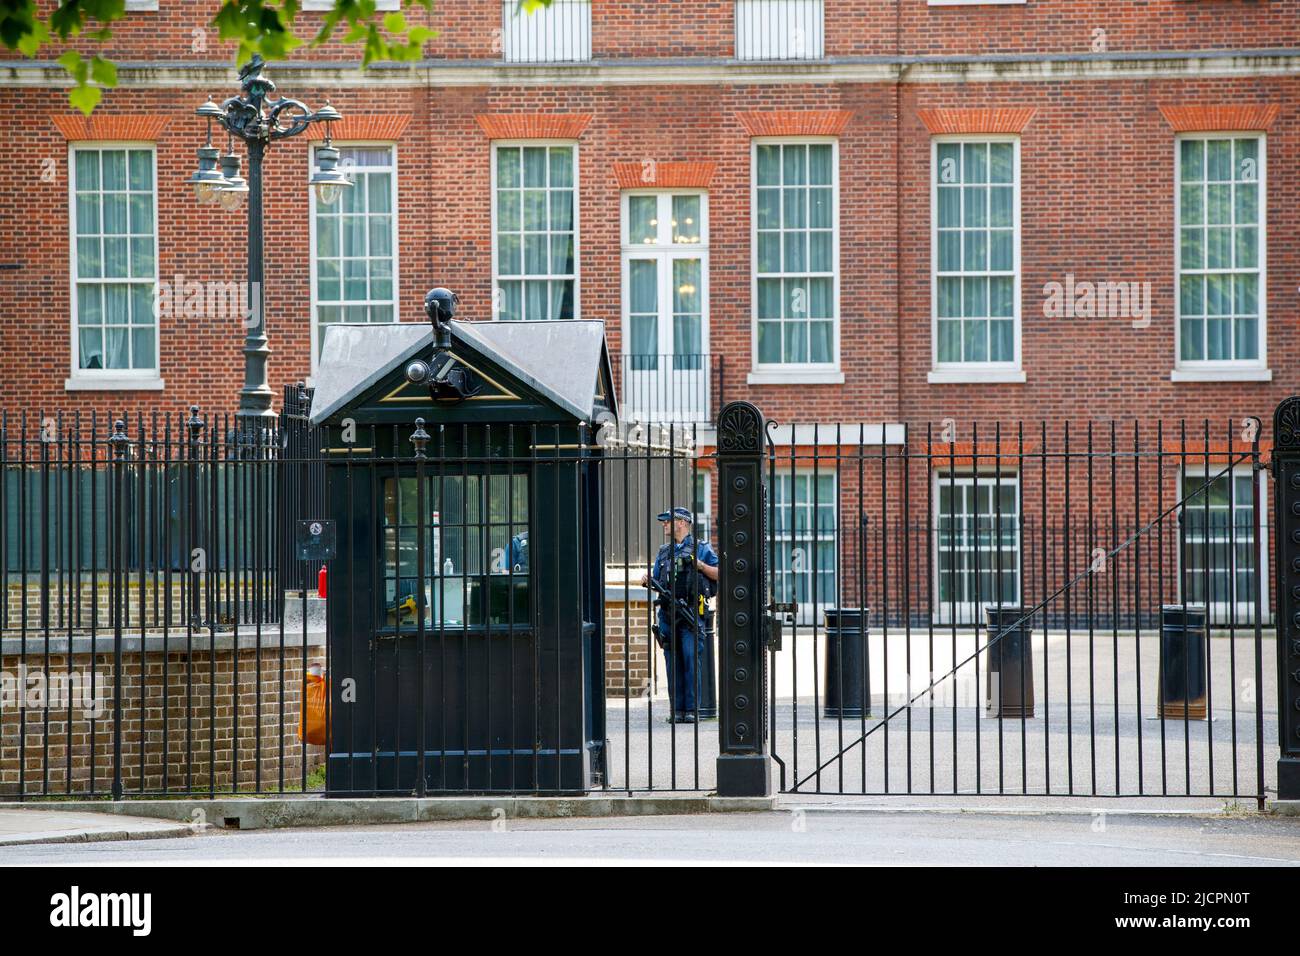 Armed police guard at side entrance to Downing Street, London, England, United Kingdom on Wednesday, May 18, 2022.Photo: David Rowland / One-Image.com Stock Photo